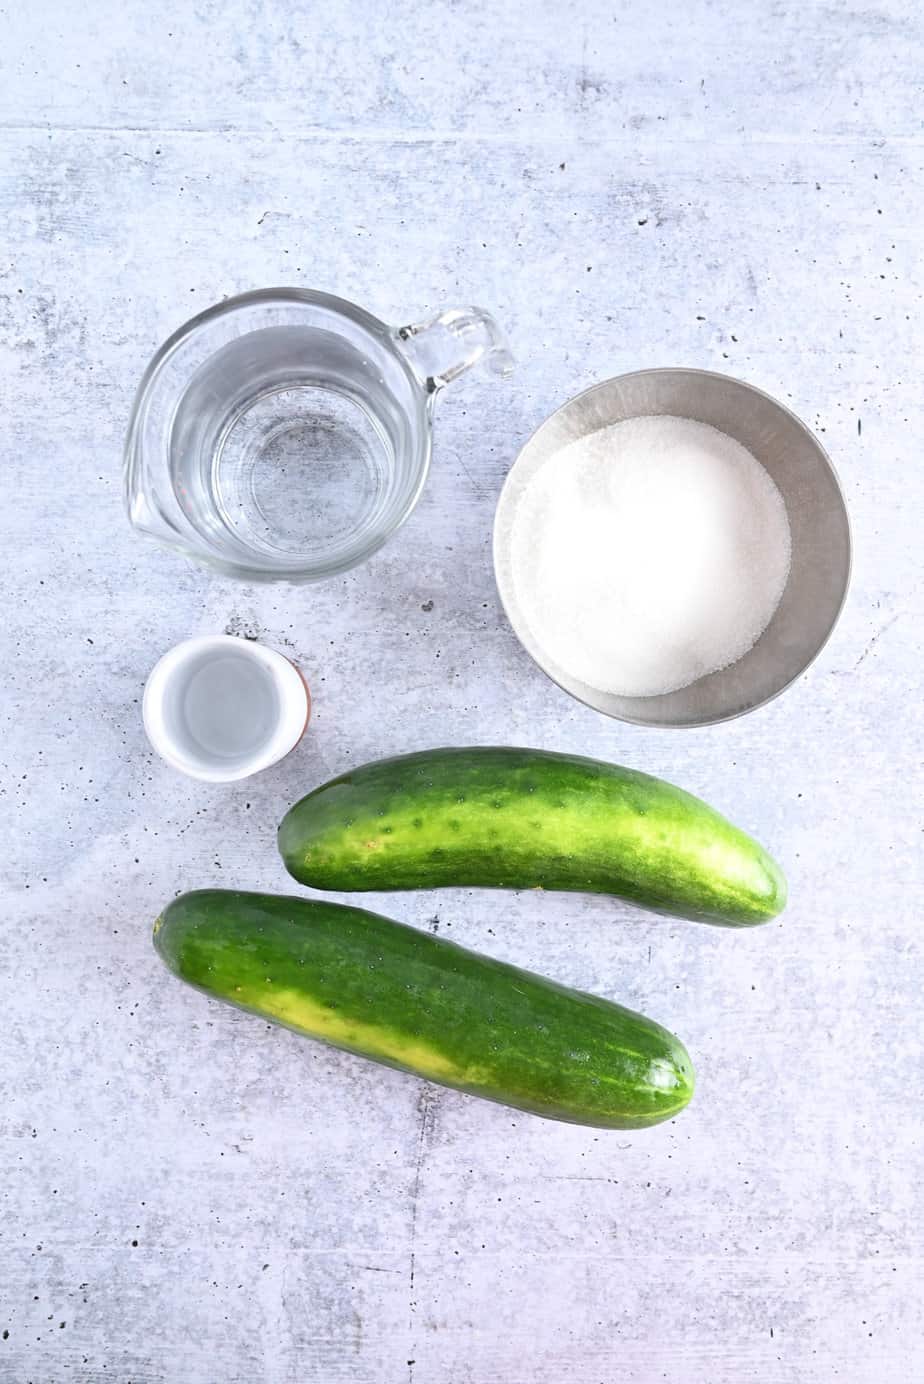 Ingredients for pickled cucumbers arranged on a concrete countertop.